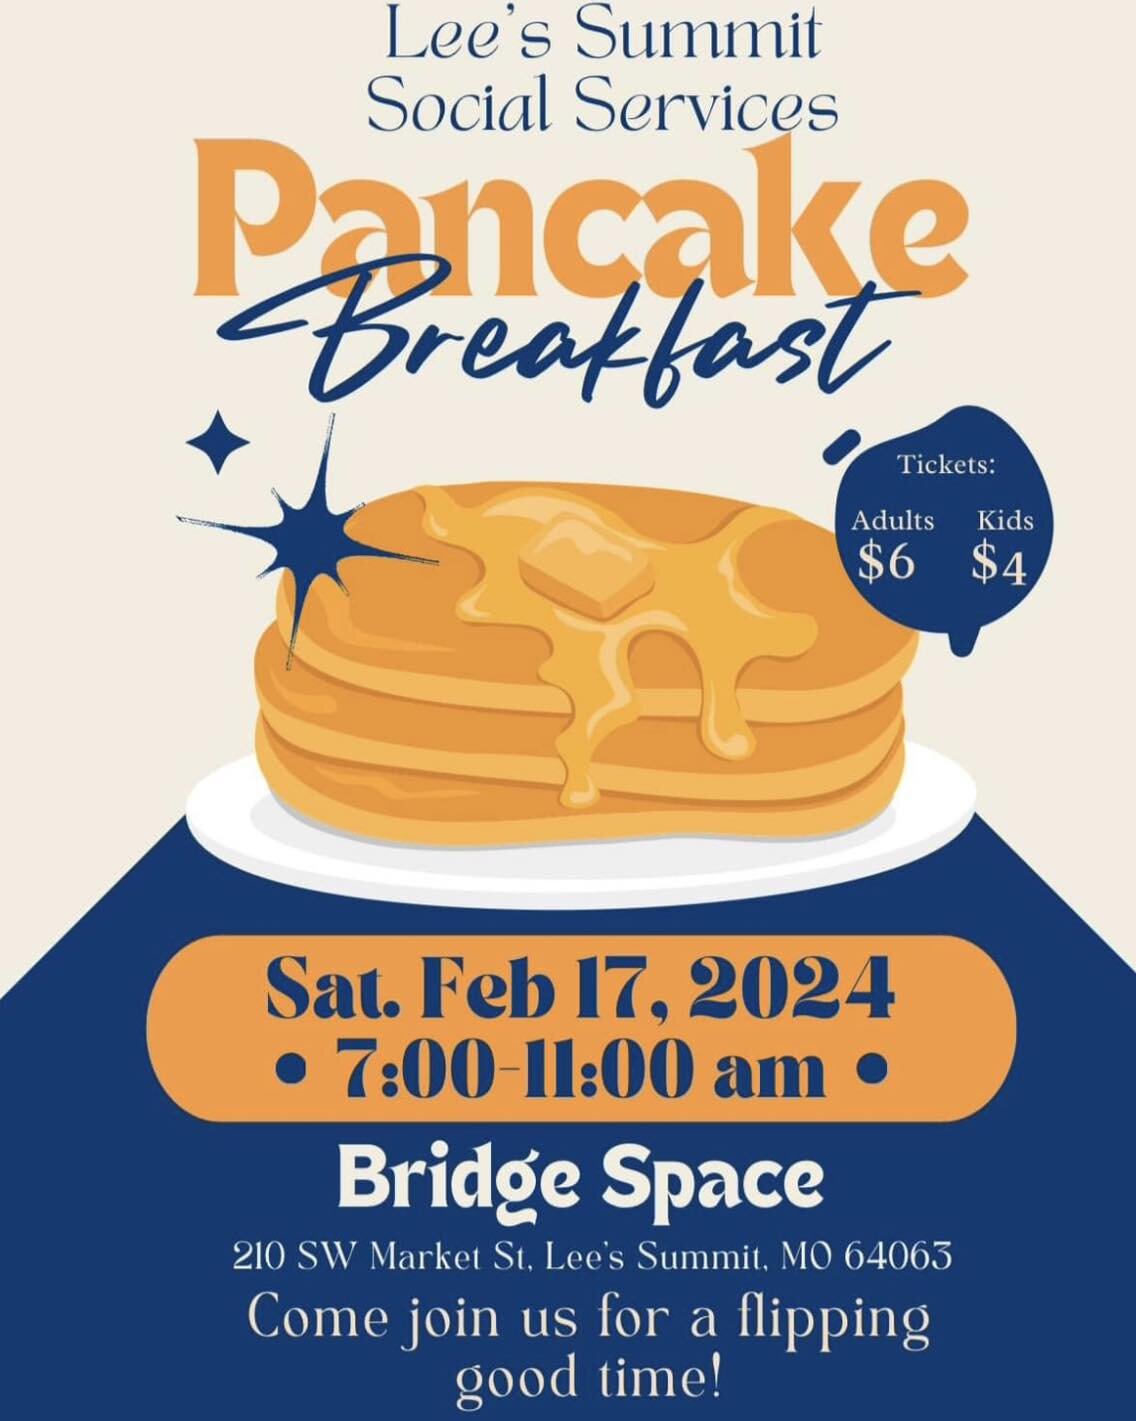 Who doesn&rsquo;t love pancakes! Come support Lee's Summit Social Services, one of our favorite non-profits who is located just a few blocks from us in Downtown Lee's Summit!